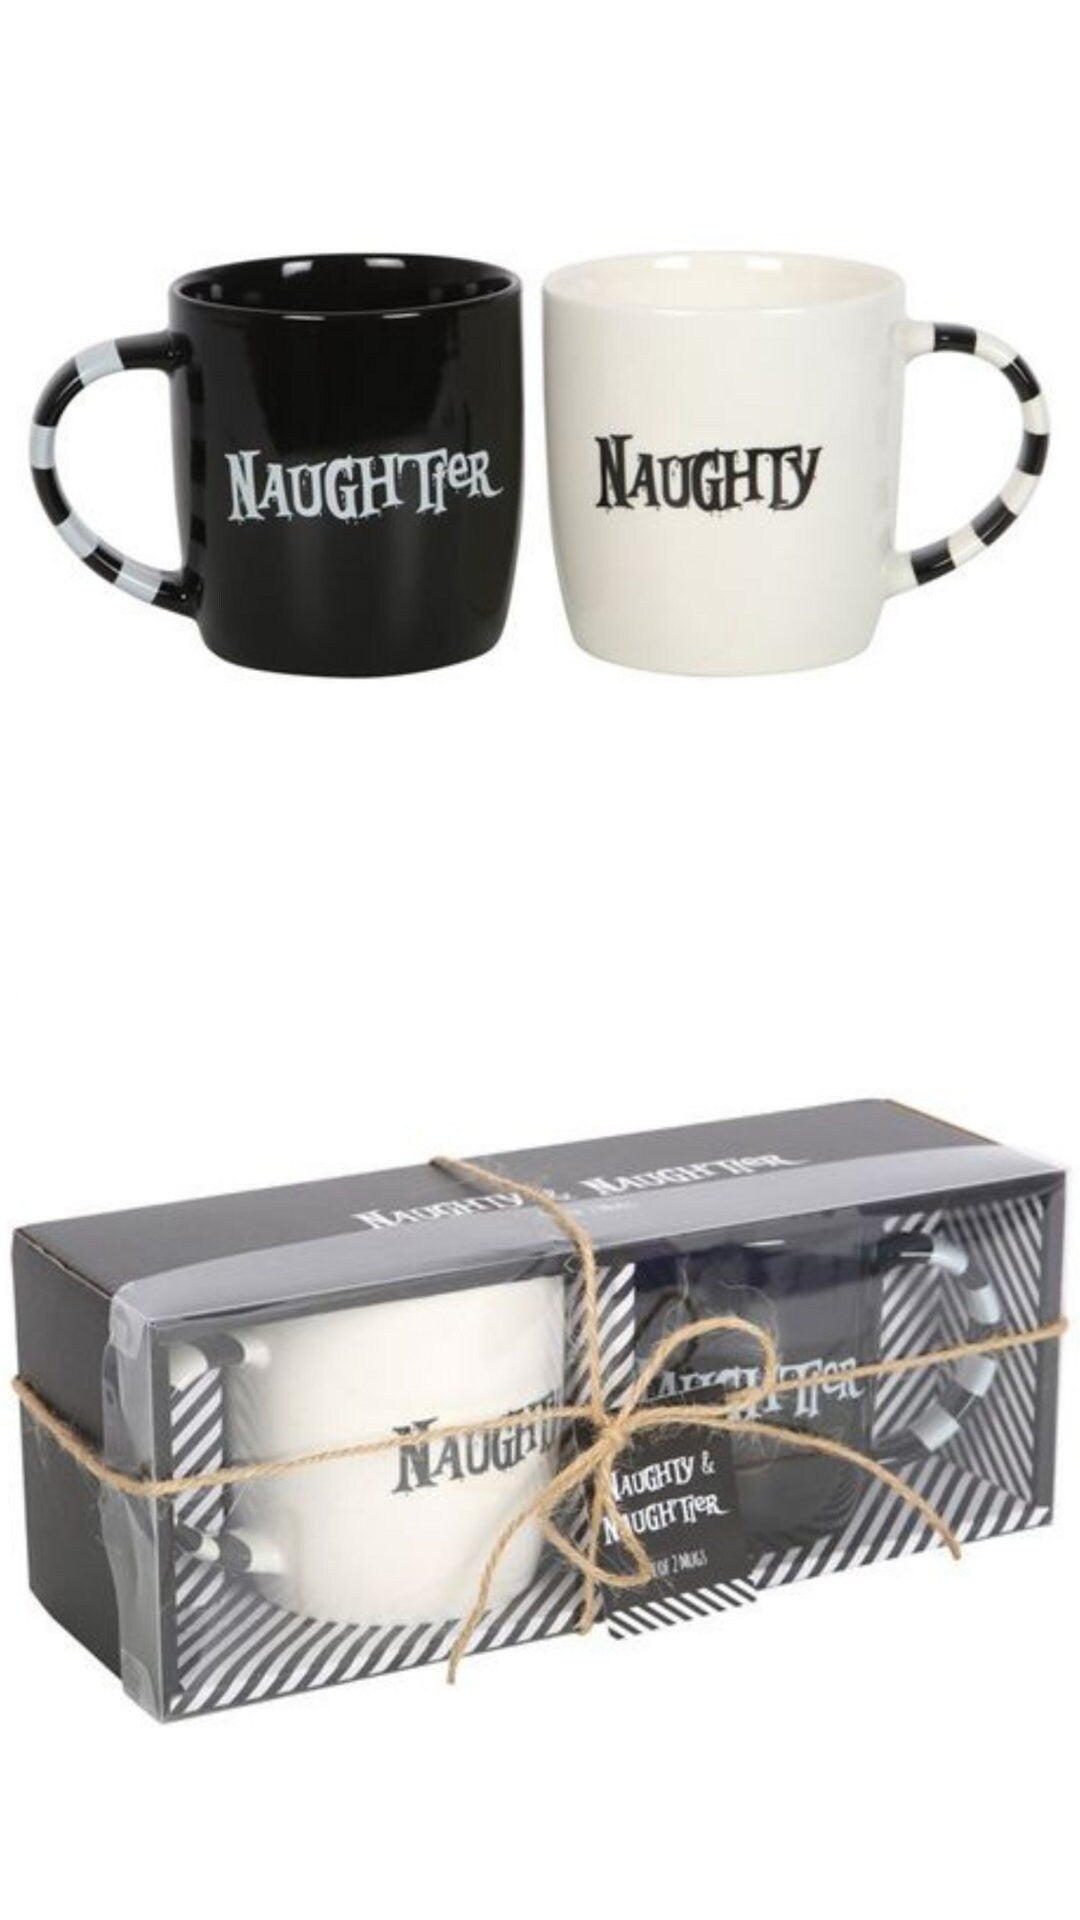 Naughty And Naughtier Ceramic Mugs, Set Of Two Coffee Mugs, Black And White Design, Gift For Couple, Fun Best Friends Present